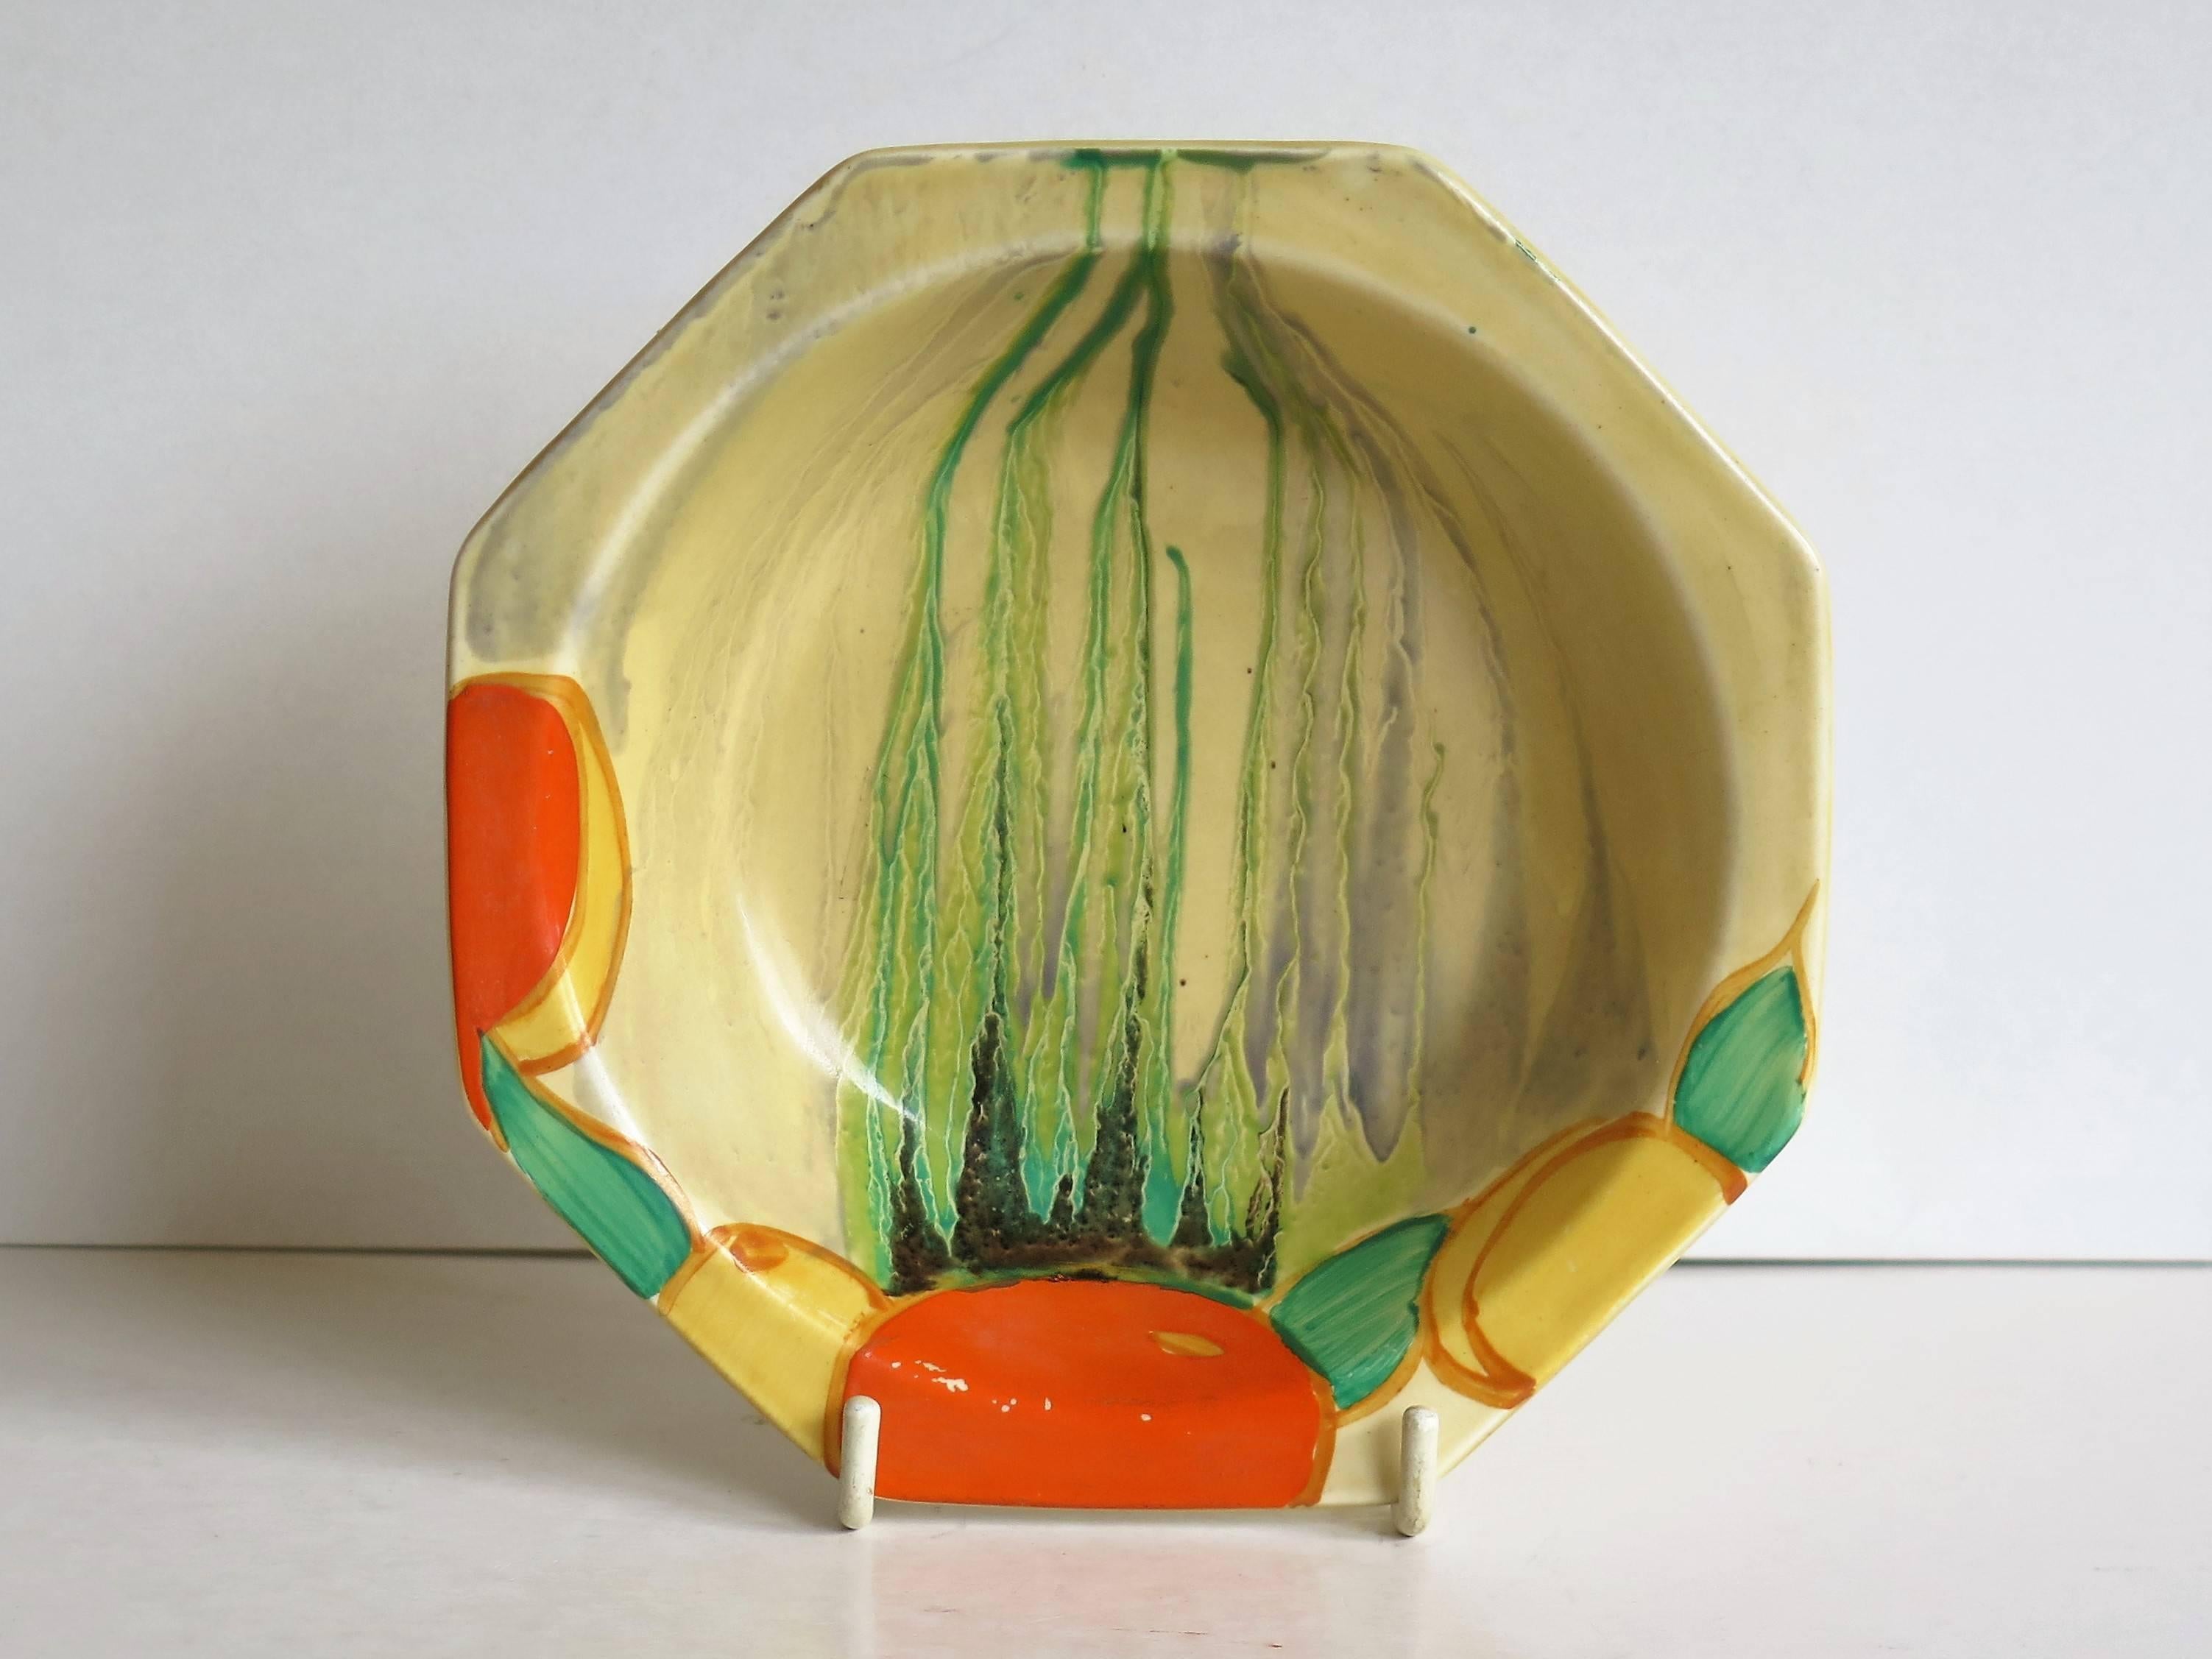 This is a small octagonal bowl by Clarice Cliff in the Delecia pattern, circa 1932.

The Delecia pattern was first introduced in 1930 and ran with various versions until 1934. We think this bowl is painted in the Delecia Citrus pattern, introduced